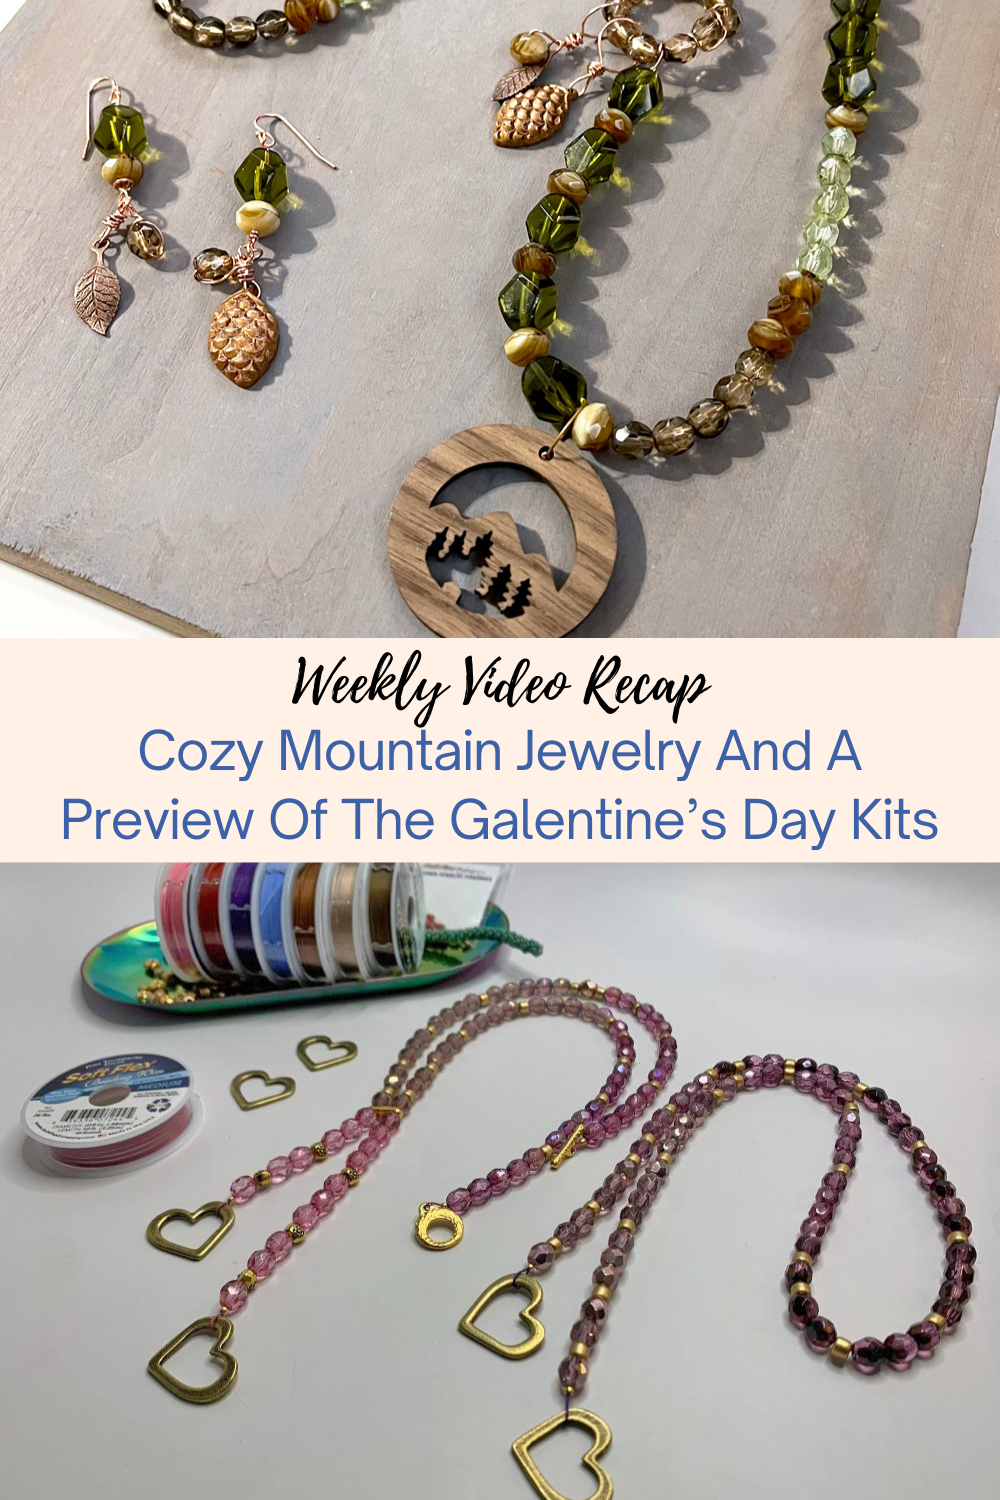 Cozy Mountain Jewelry And A Preview Of The Galentine’s Day Kits Collage